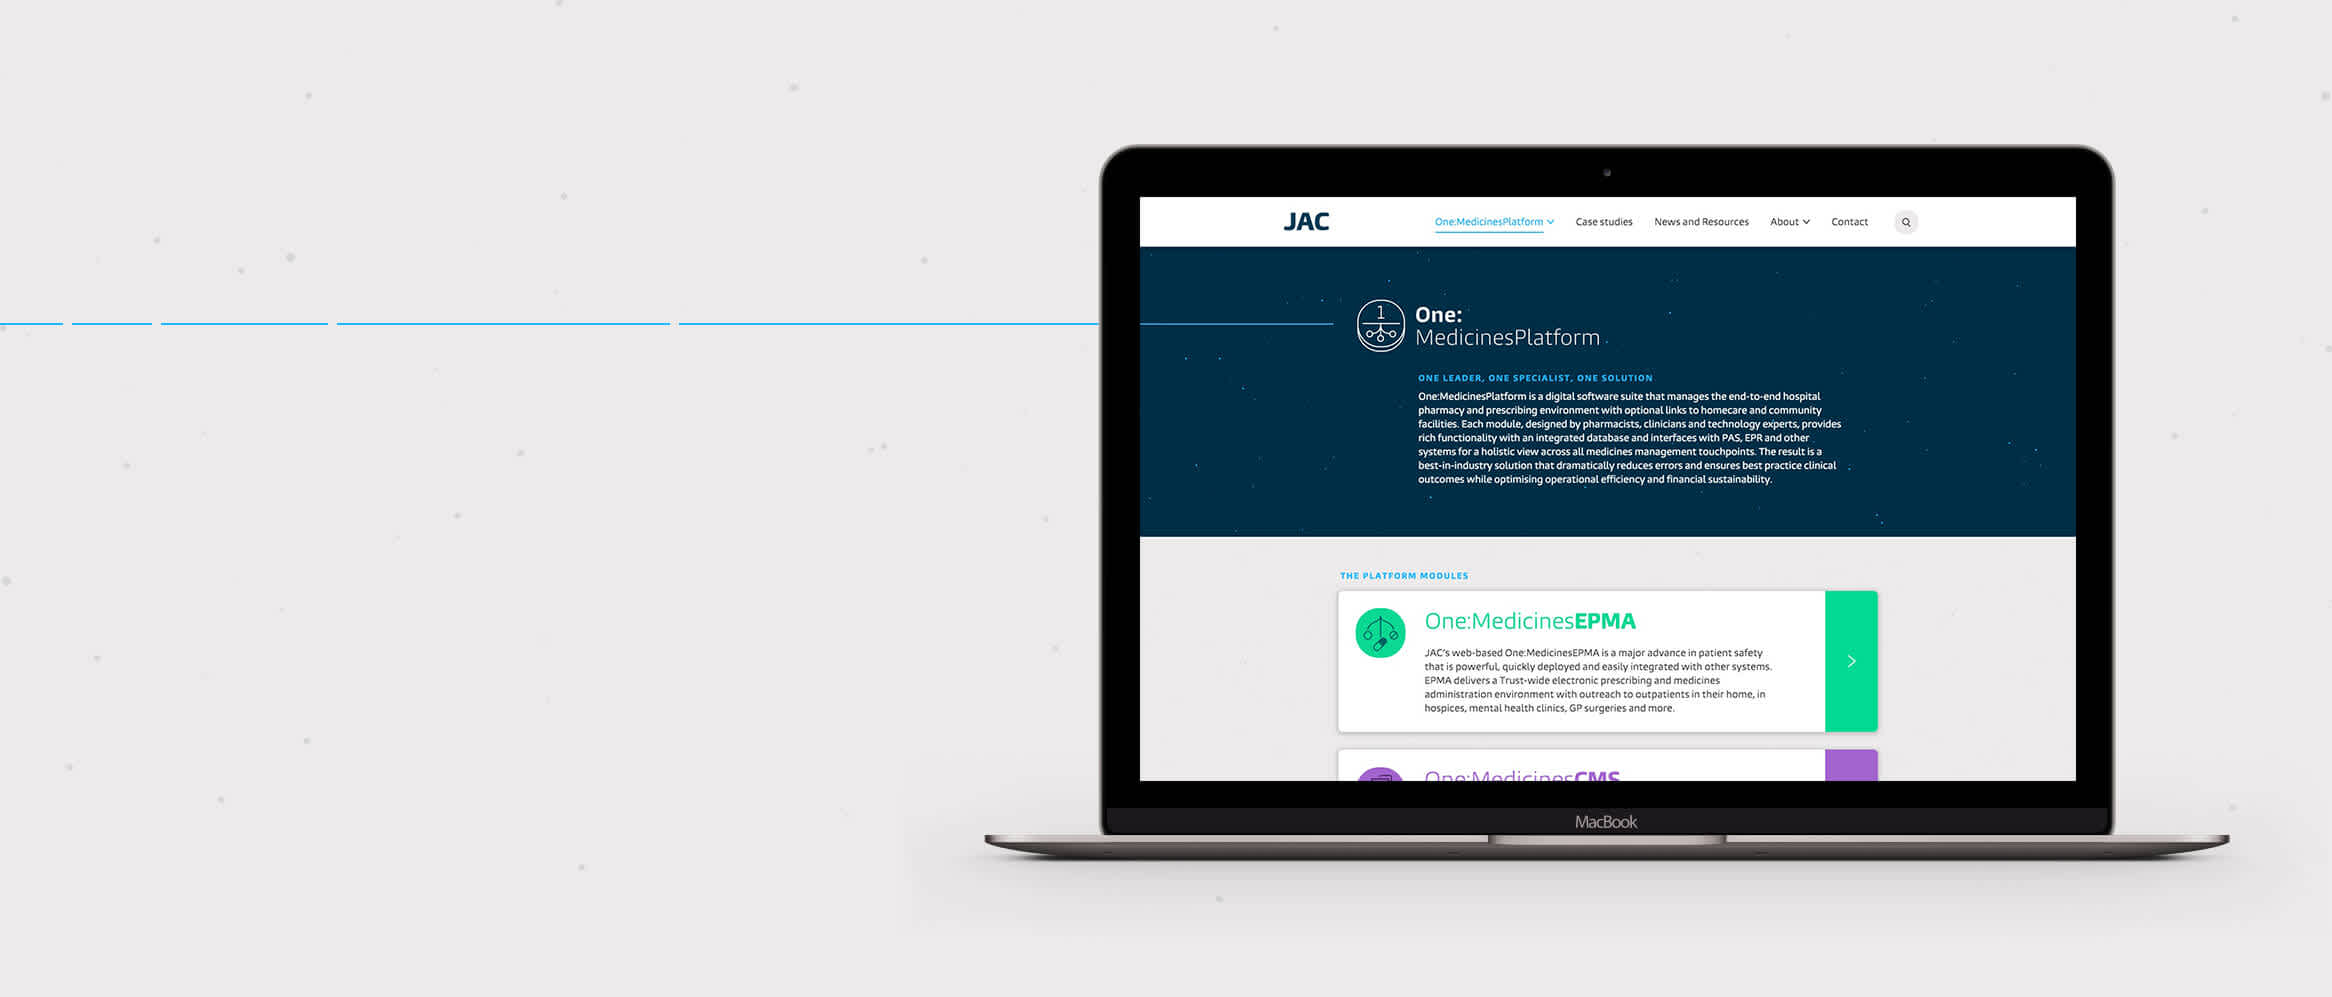 JAC website mockup of the 'One: Medicines Platform' page in a laptop